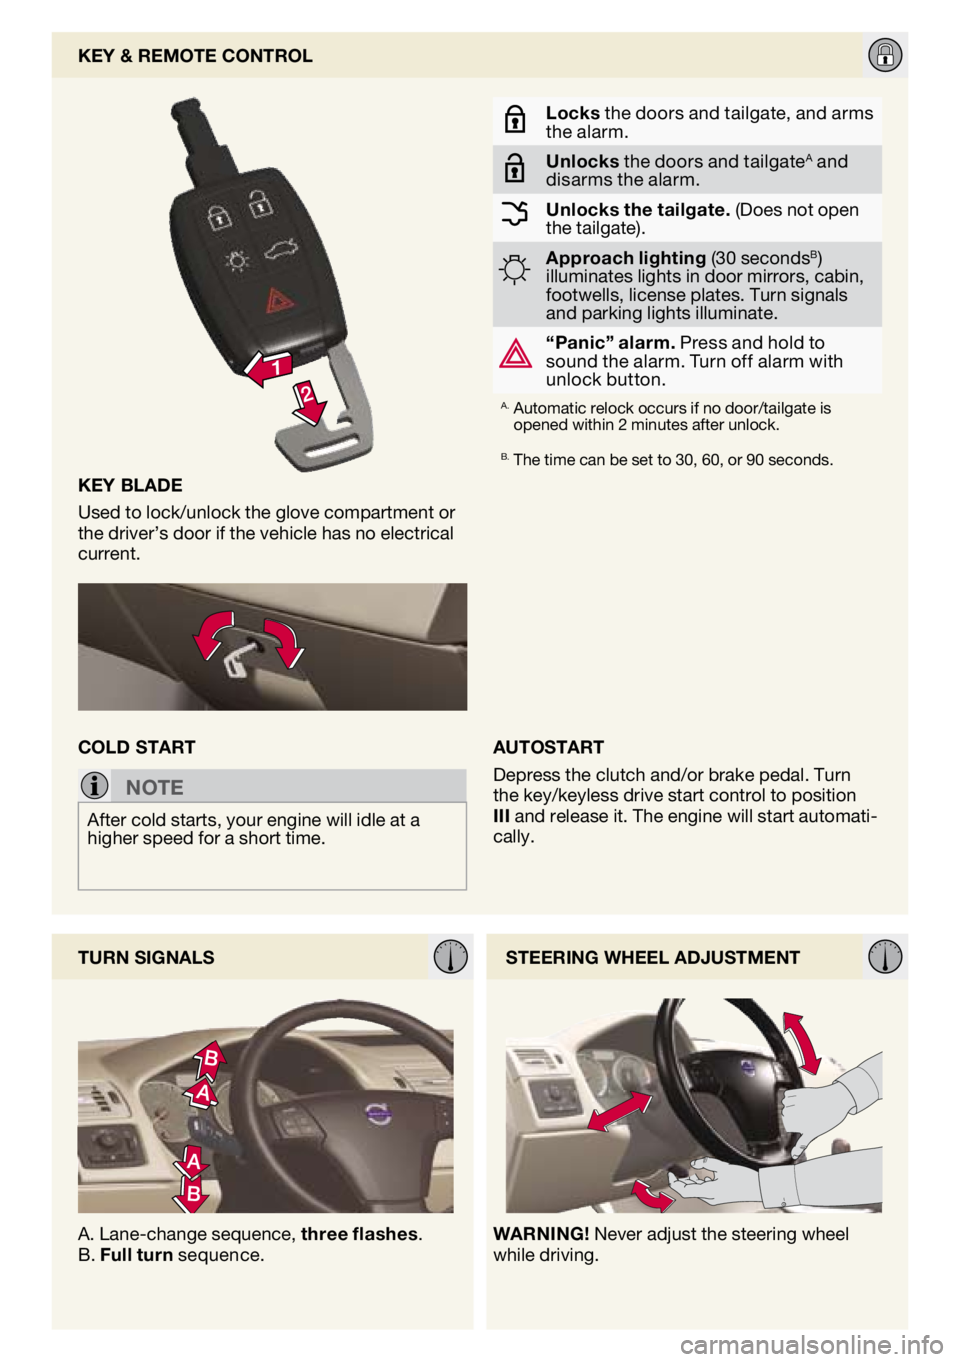 VOLVO V50 2009  Quick Guide 
AUTOSTART
Depress the clutch and/or brake pedal. Turn the key/keyless drive start control to position III and release it. The engine will start automati-cally. 
key blAde
Used to lock/unlock the glov